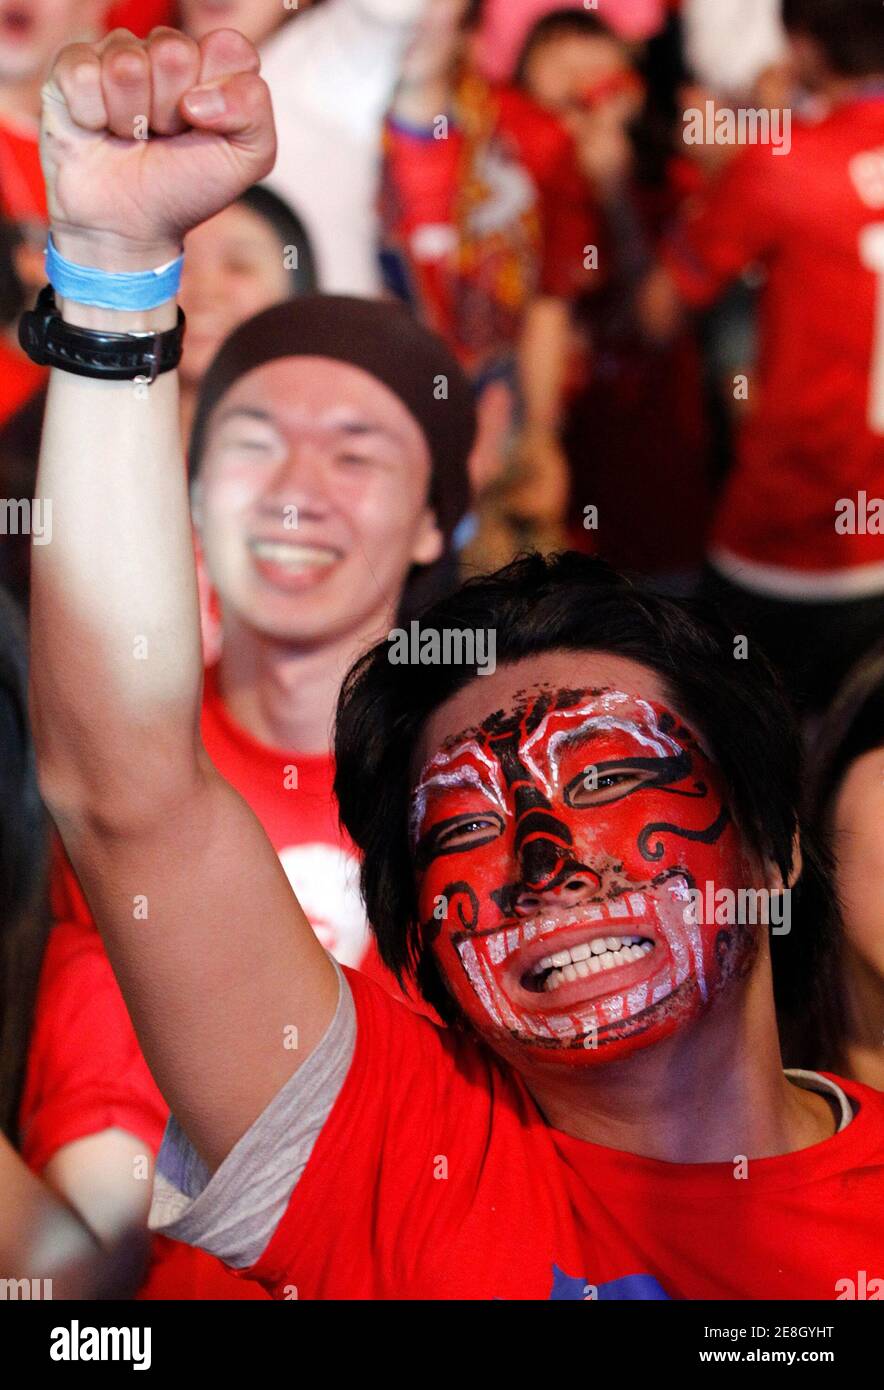 A South Korean soccer fan reacts as he watches a live TV broadcast of their 2010 World Cup Group B soccer match against Nigeria in Durban, at the Seoul City Hall Plaza June 23, 2010. South Korea drew 2-2 in a tense match with Nigeria to advance to the second round of the World Cup on Tuesday.  REUTERS/Jo Yong-Hak (SOUTH KOREA - Tags: SPORT SOCCER WORLD CUP) Stock Photo